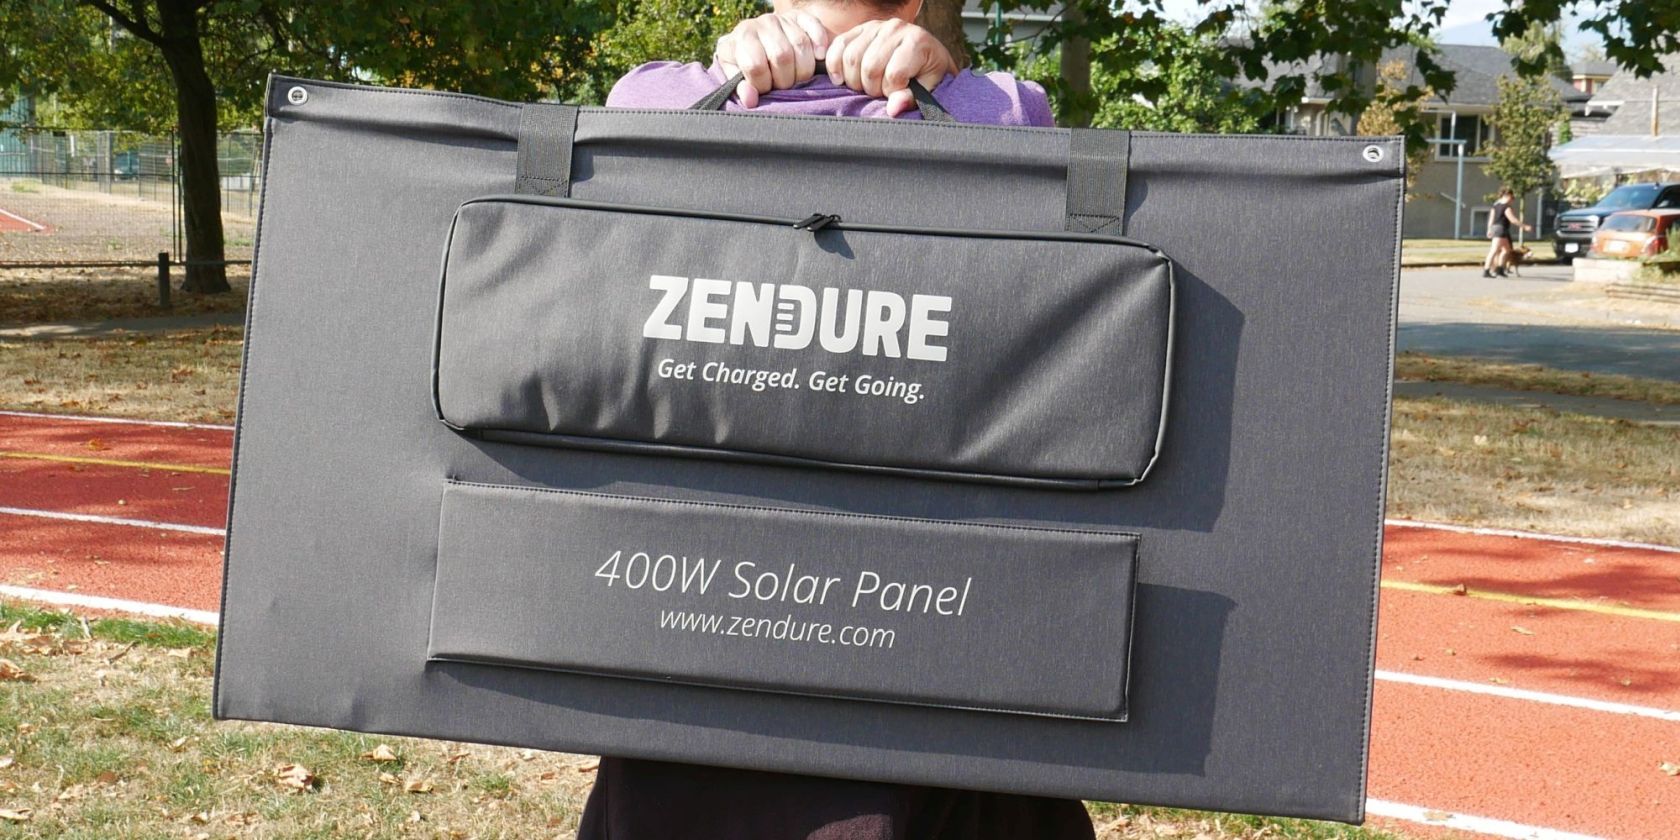 Zendure 400W Solar Panel Man Carrying Portable Solar Panel on His Back Featured Image